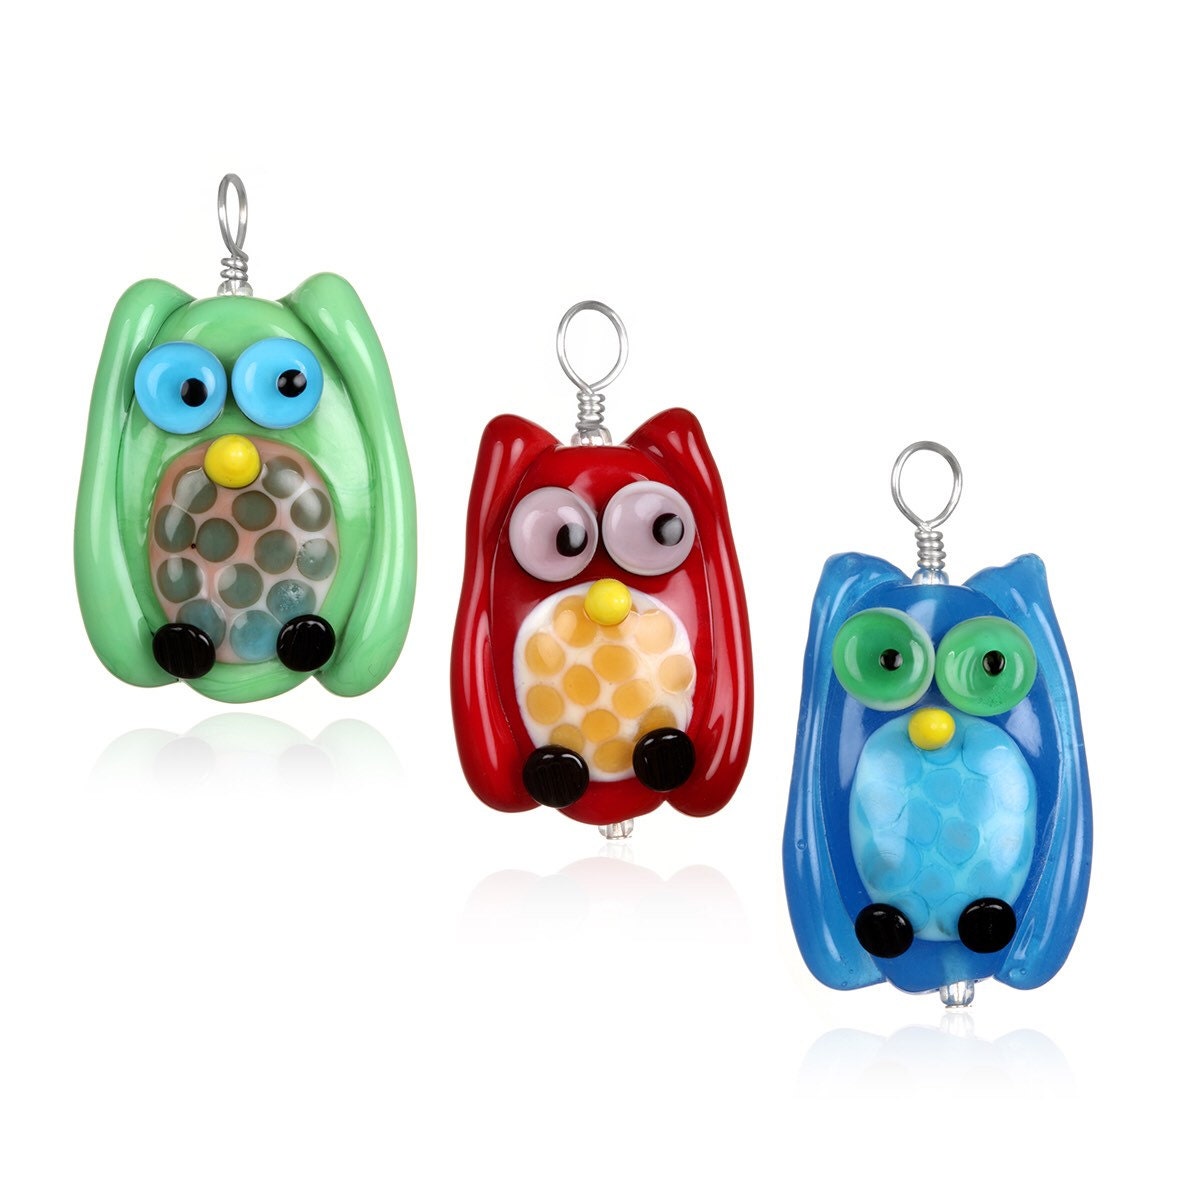 Glass Owl Pendant Necklace on Leather